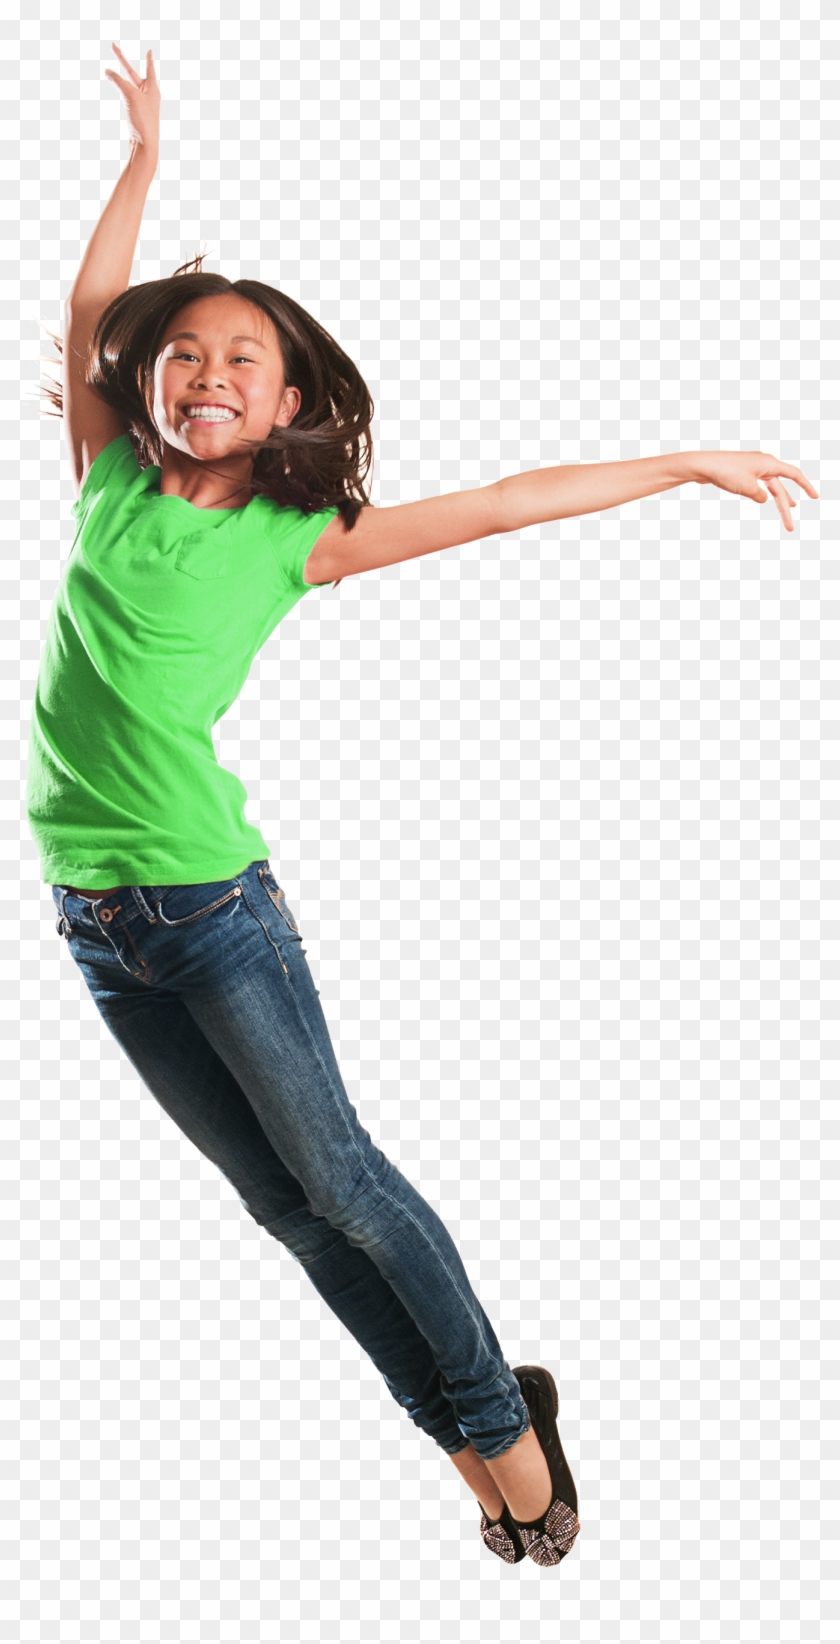 Png For Free - Happy Girl Jumping Png Clipart #2020323